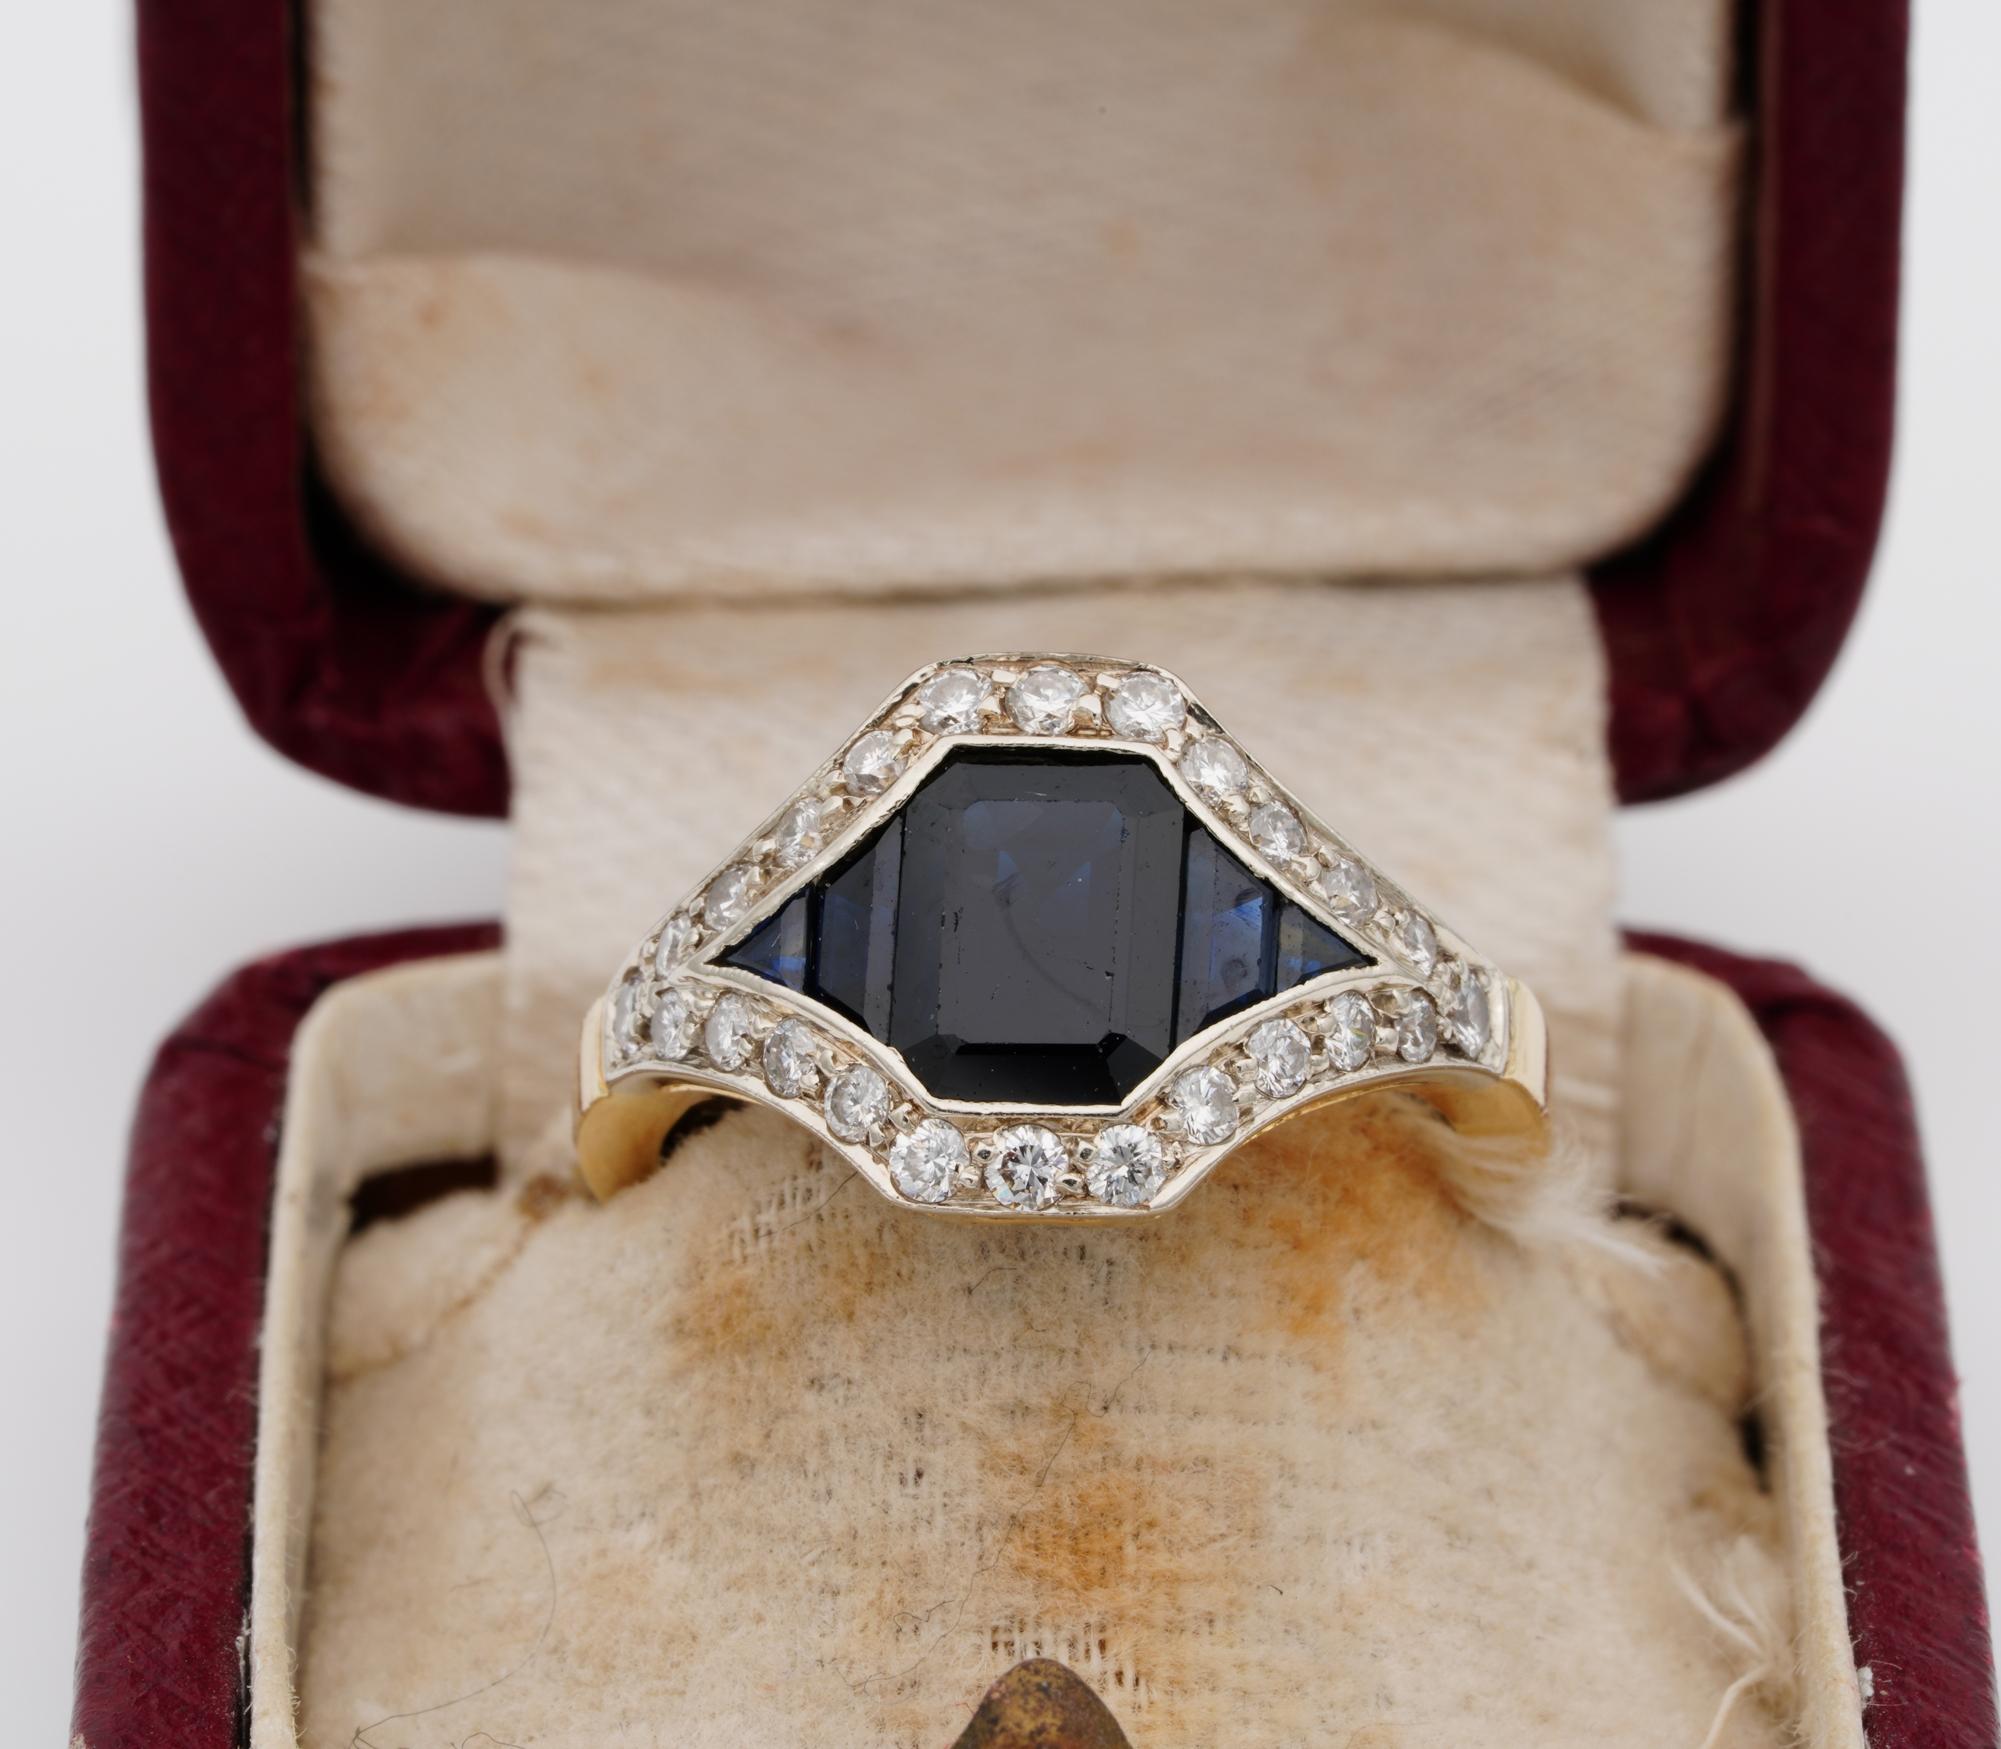 
Art Deco of Distinction

Beautiful French origin late Art Deco period Sapphire and Diamond ring of distinction
Very finely hand crafted of solid 18 Kt gold with a solid Platinum top
The exquisite design is made hexagonal by the Centre Sapphire